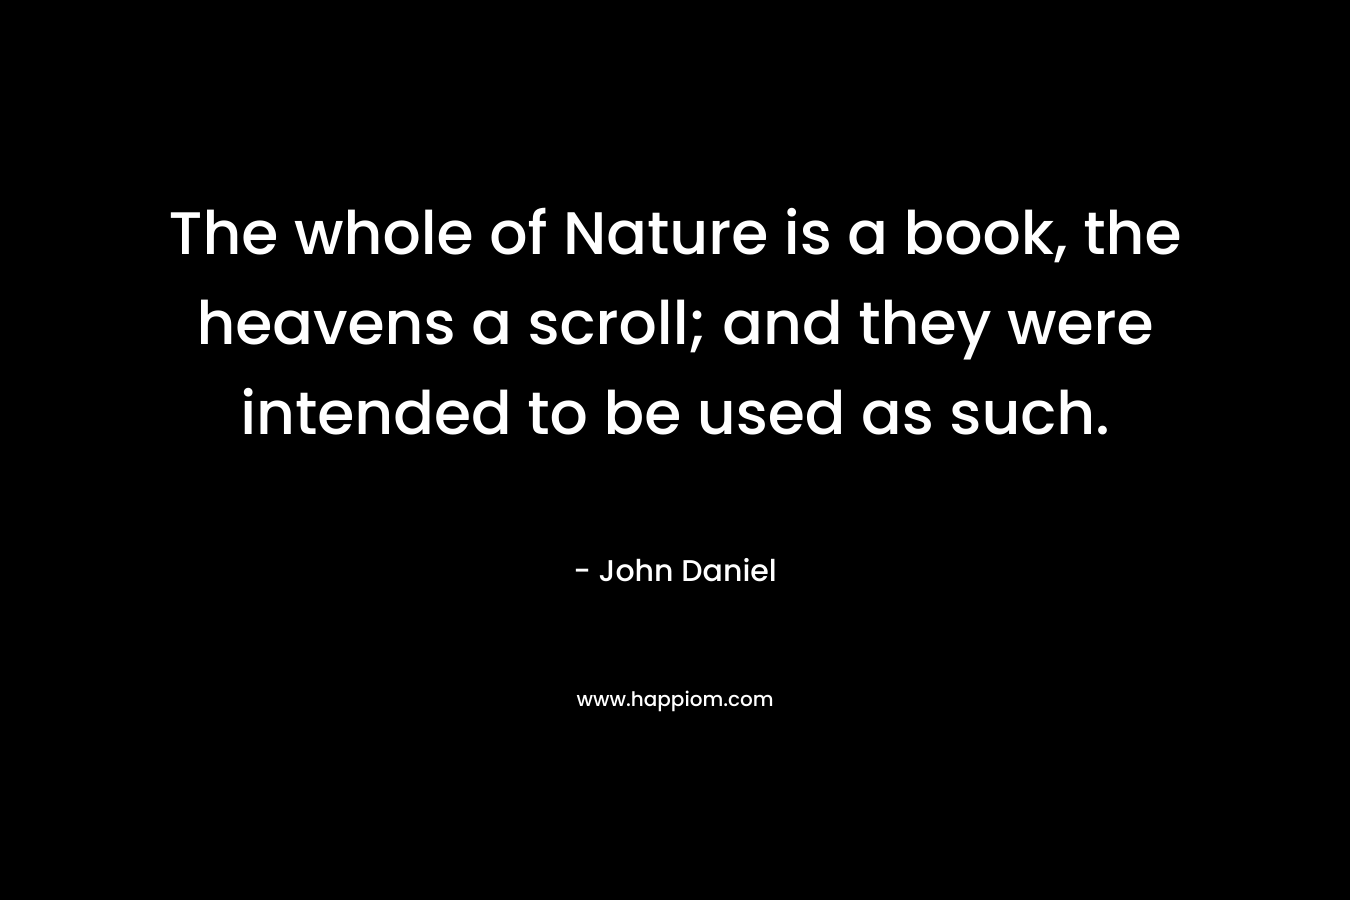 The whole of Nature is a book, the heavens a scroll; and they were intended to be used as such.